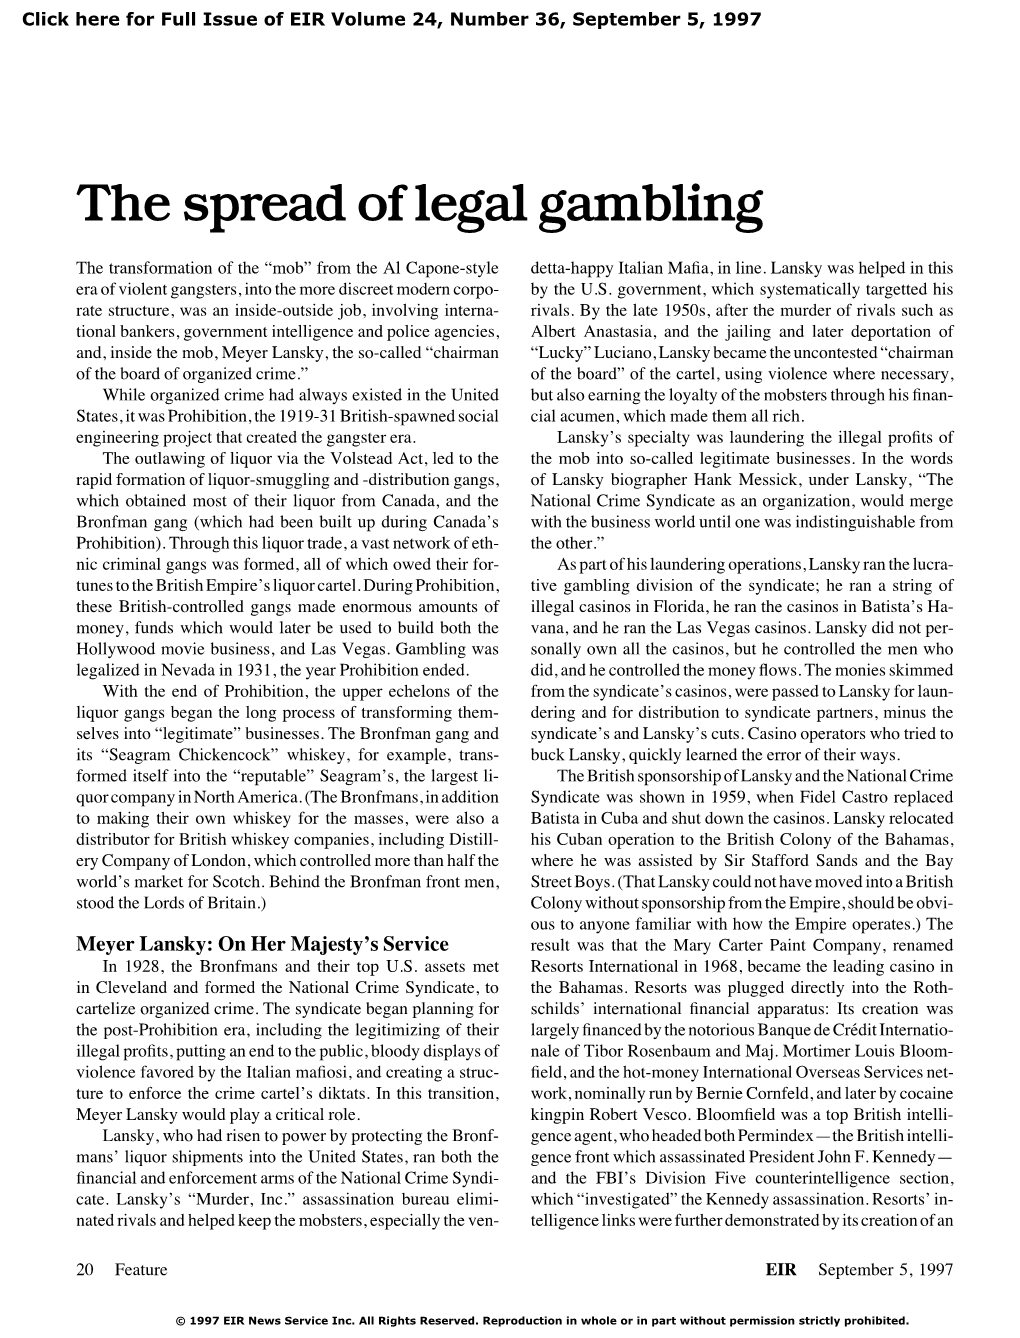 The Spread of Legal Gambling